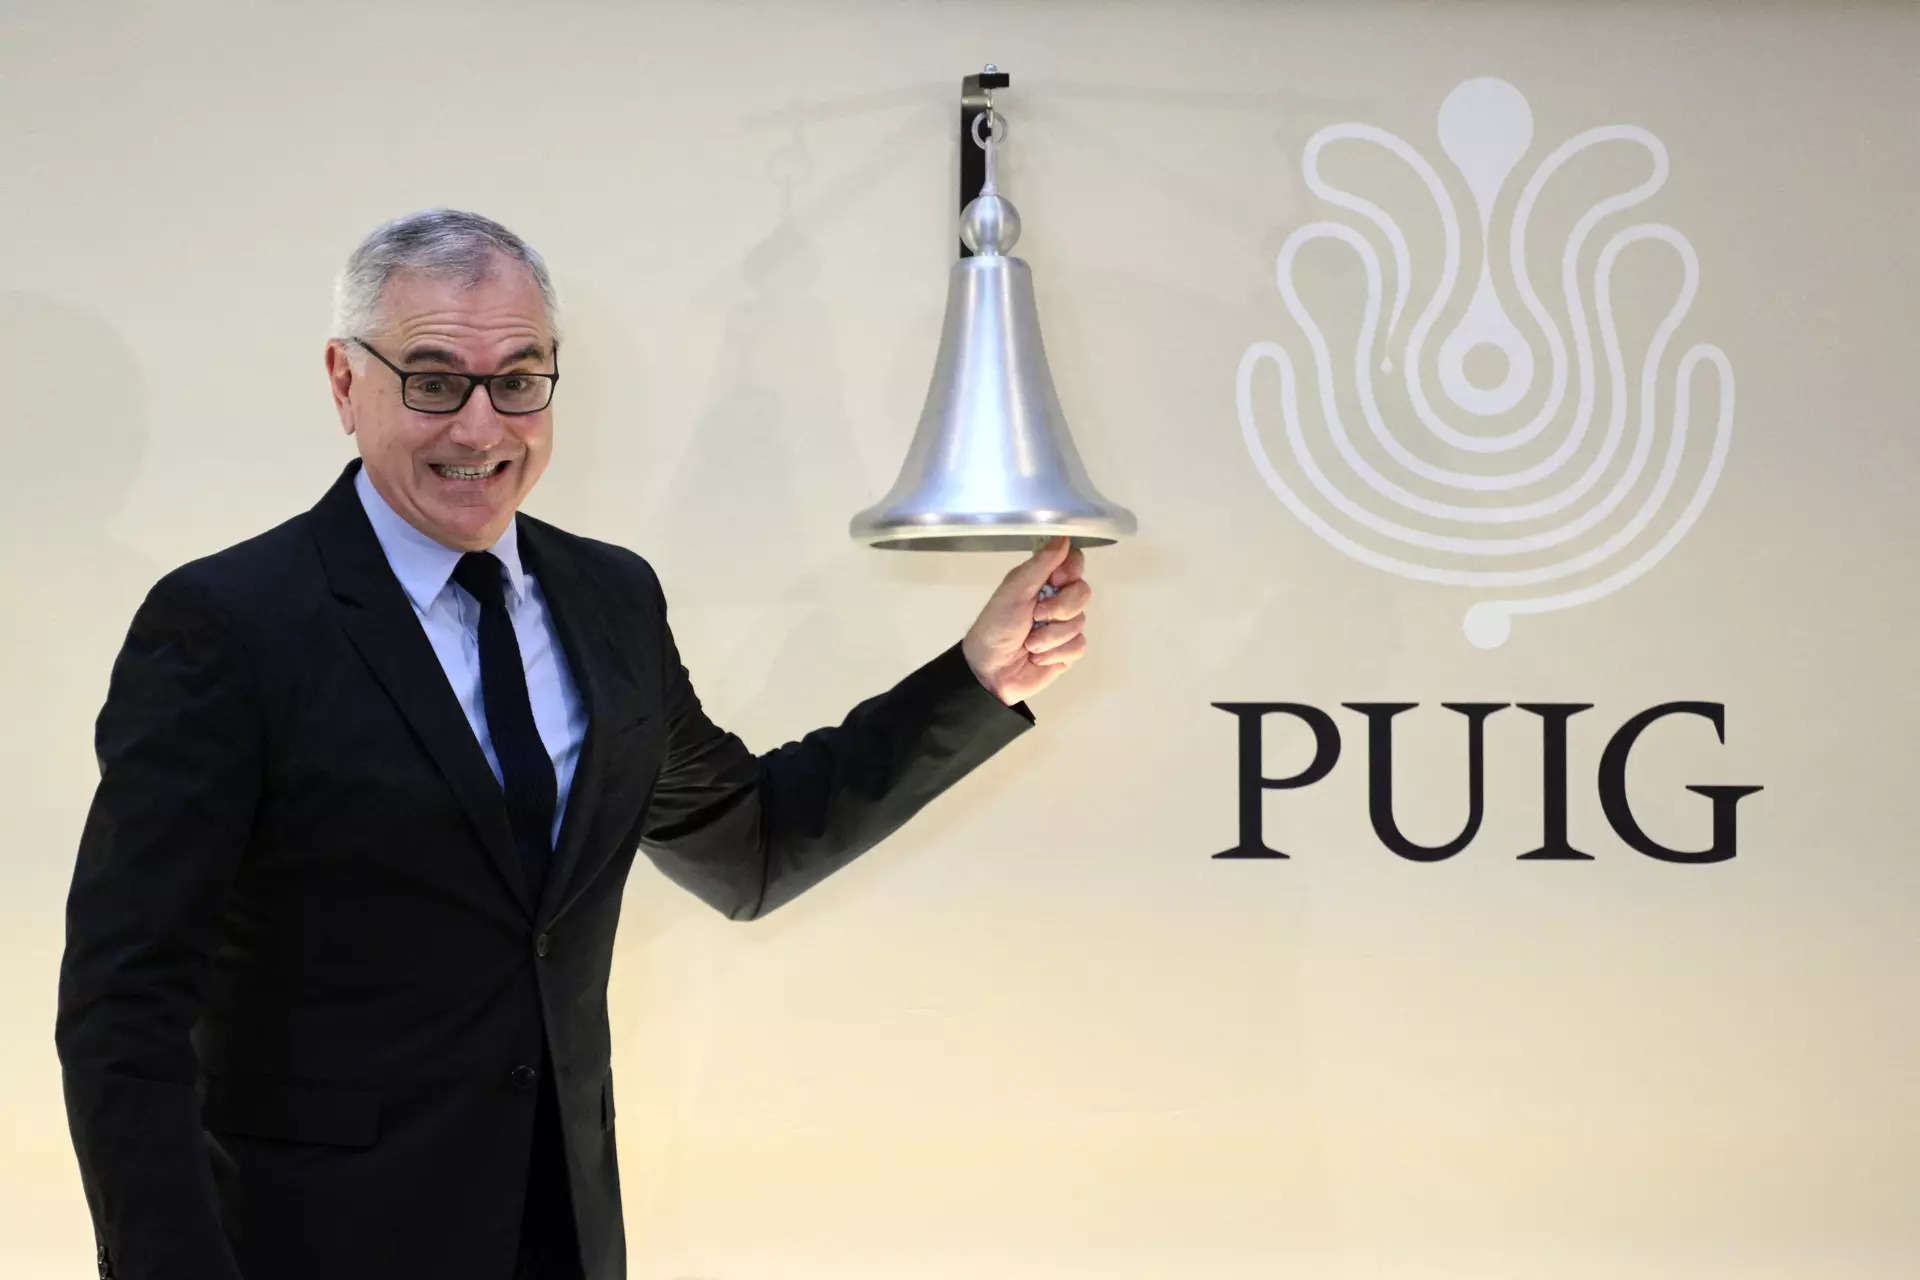 <p>CEO of Spanish fashion and beauty group Puig, Marc Puig, rings the bell during the initial public offerings of the company on May 3, 2024 in Barcelona. The iconic Nina Ricci, Paco Rabanne and Jean-Paul Gaultier labels make their market debut today as Spanish fashion and beauty group Puig begins trading on the Madrid stock exchange.</p>